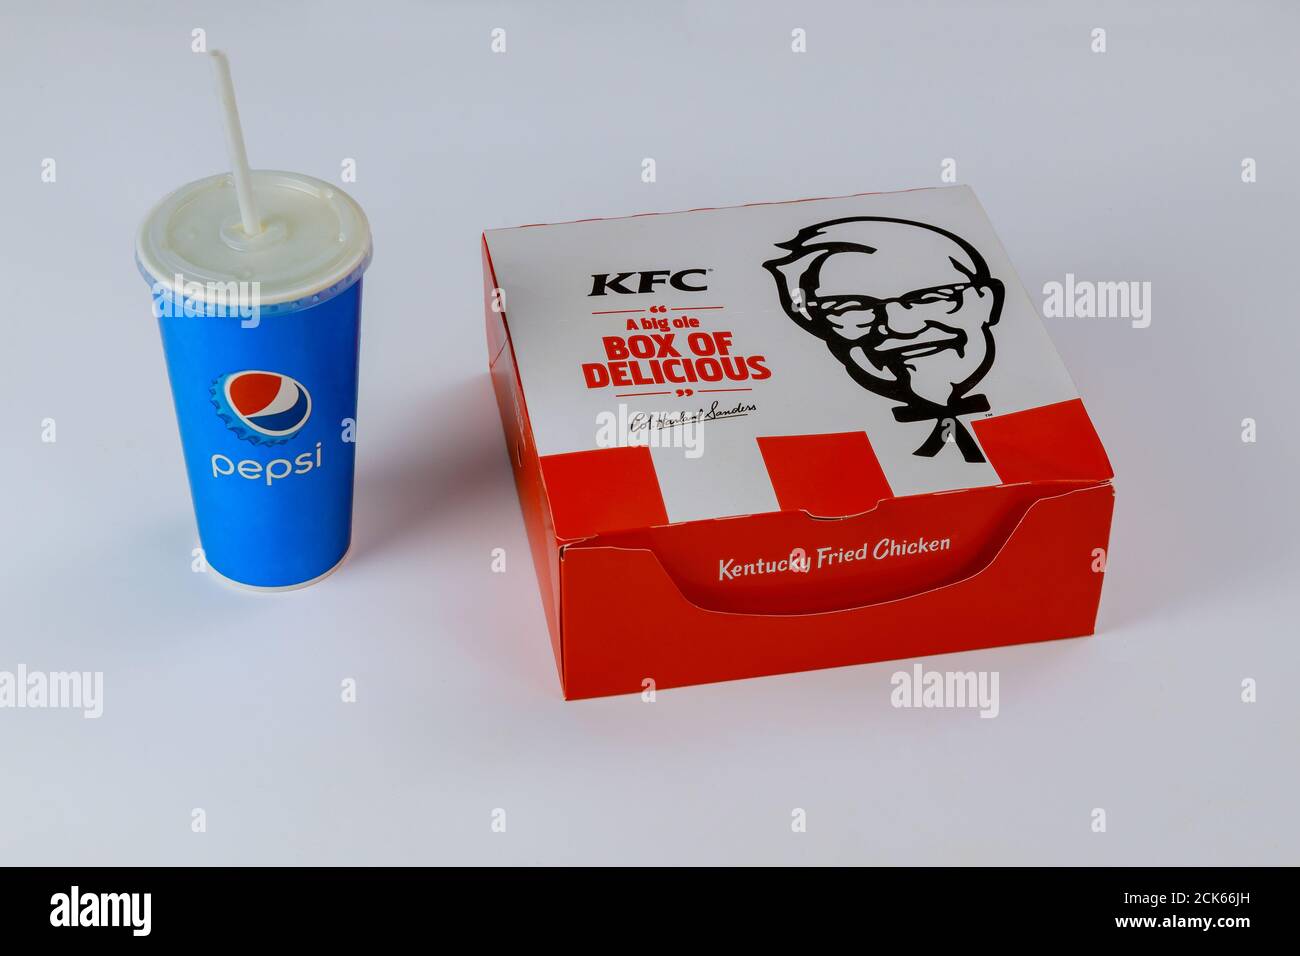 CLEVELAND OH US 15 SEPTEMBER 2020: KFC Popular fast food restaurant now featured menu, the box and Pepsi refill Stock Photo